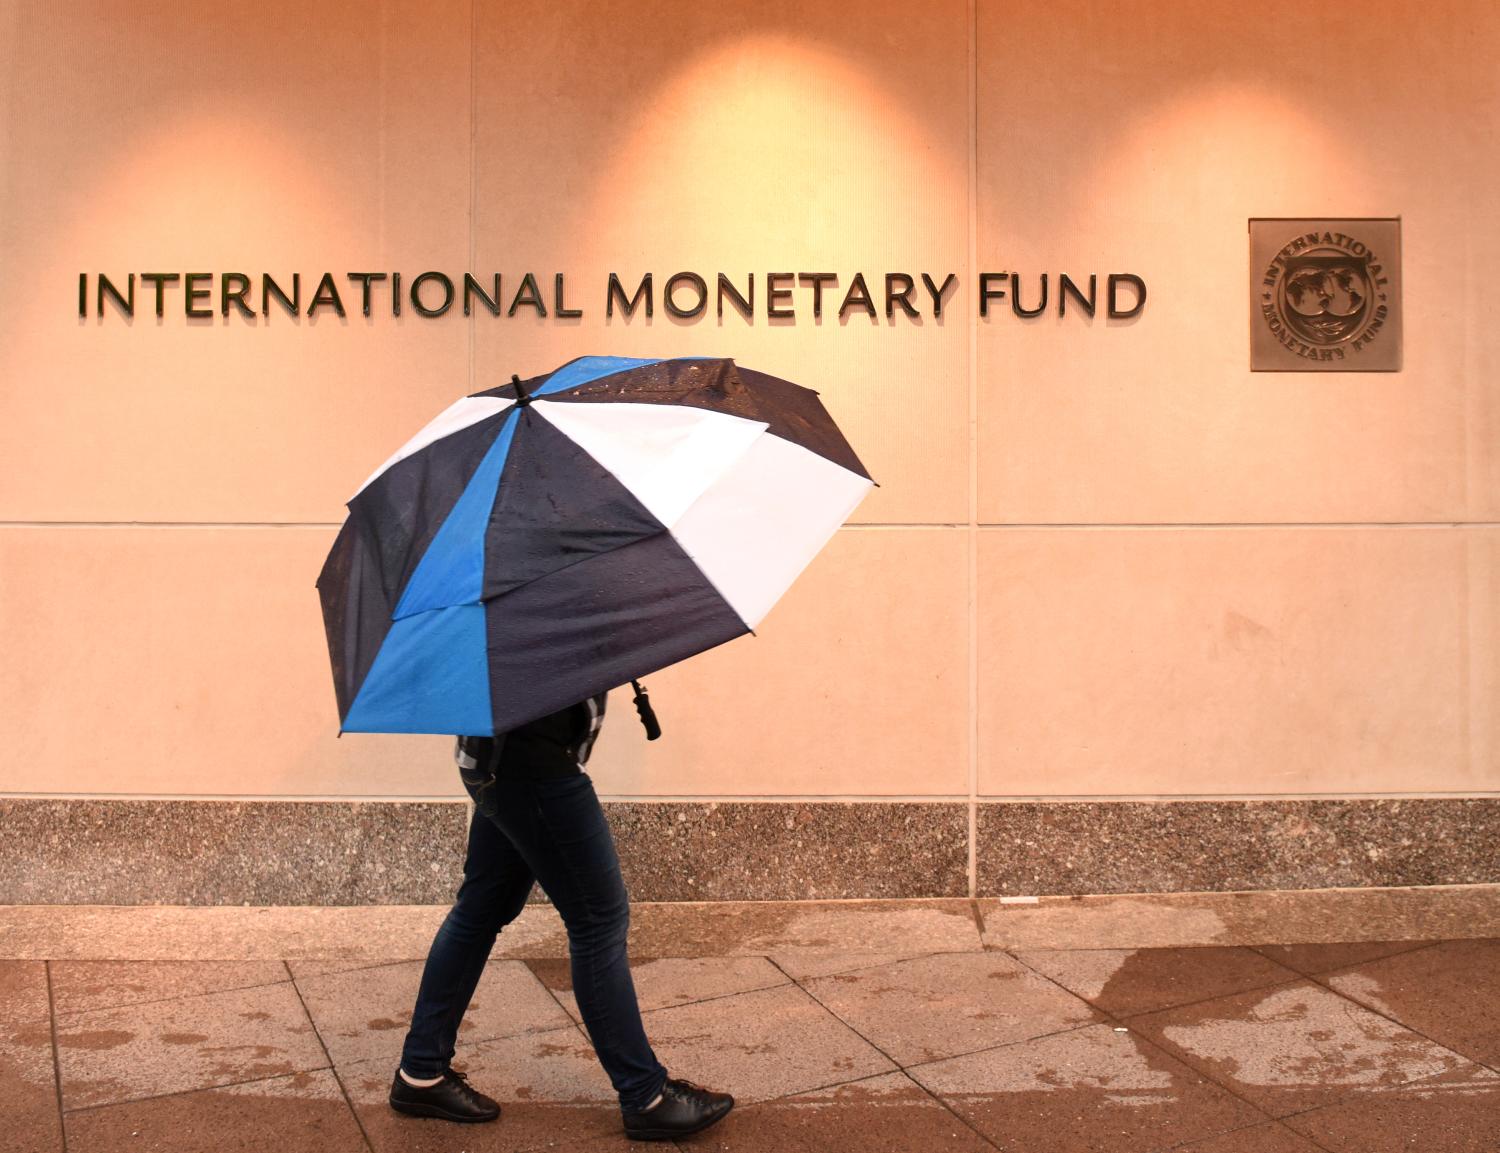 Person with umbrella in front of International Monetary Fund sign.